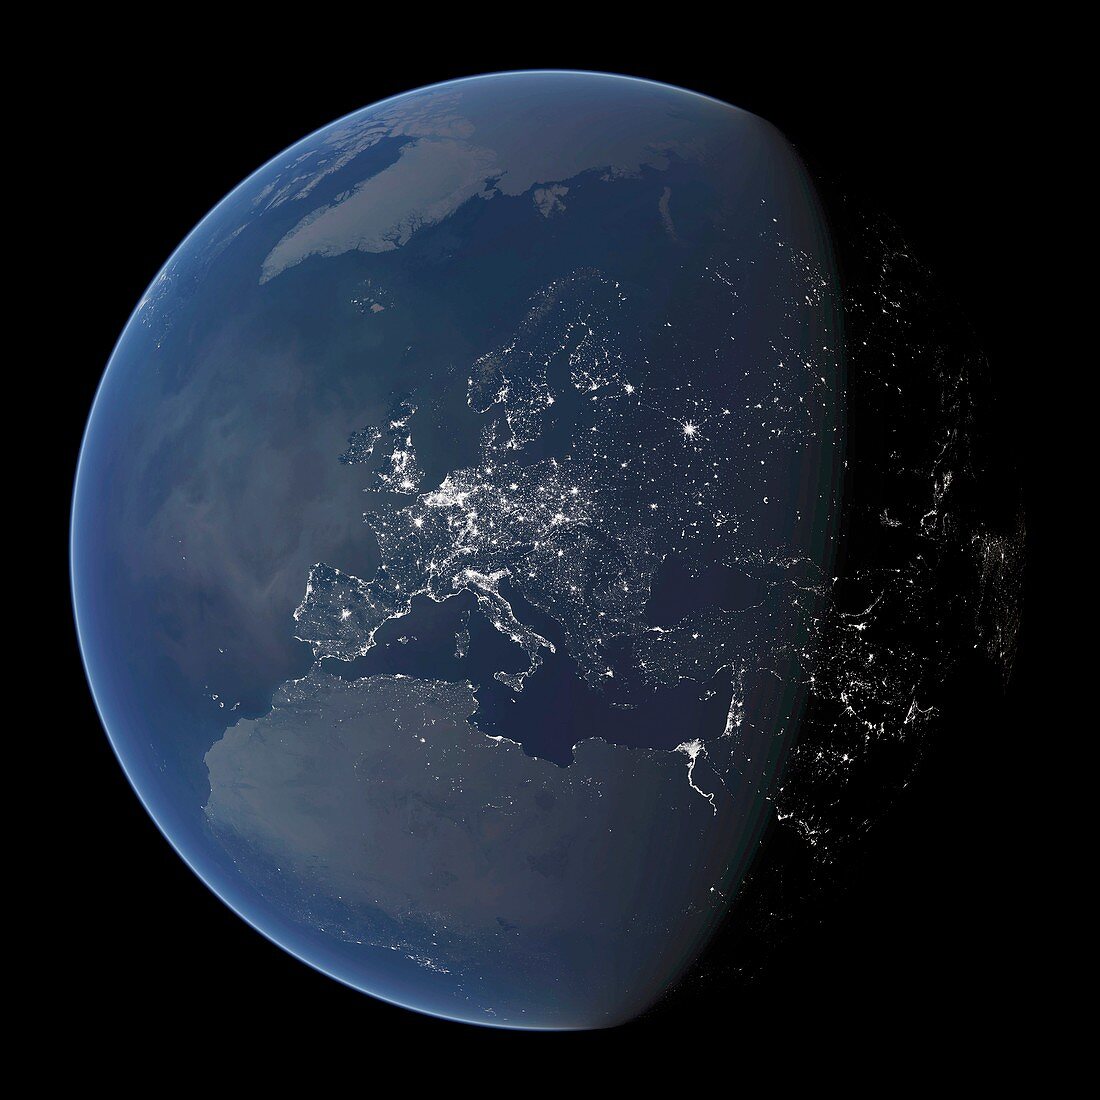 Europe and north Africa at night